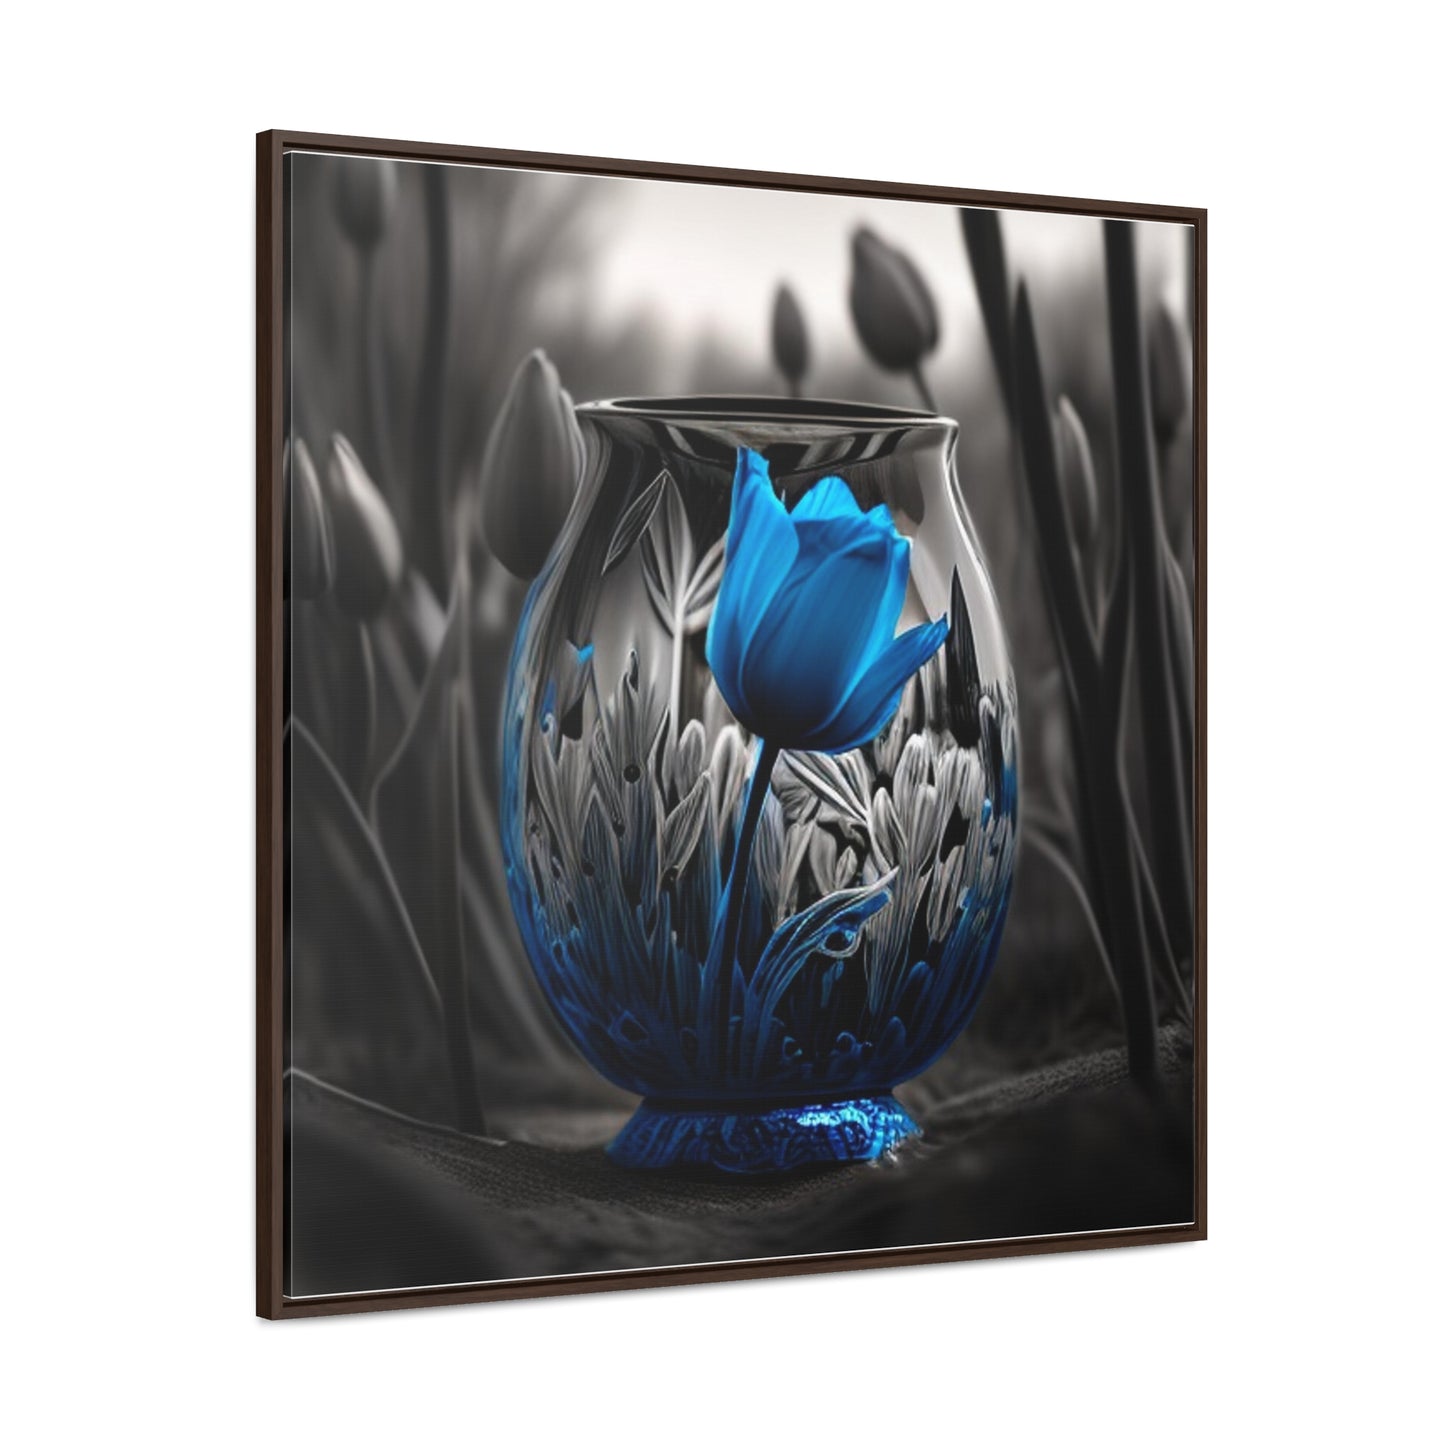 Gallery Canvas Wraps, Square Frame Tulip Blue 1